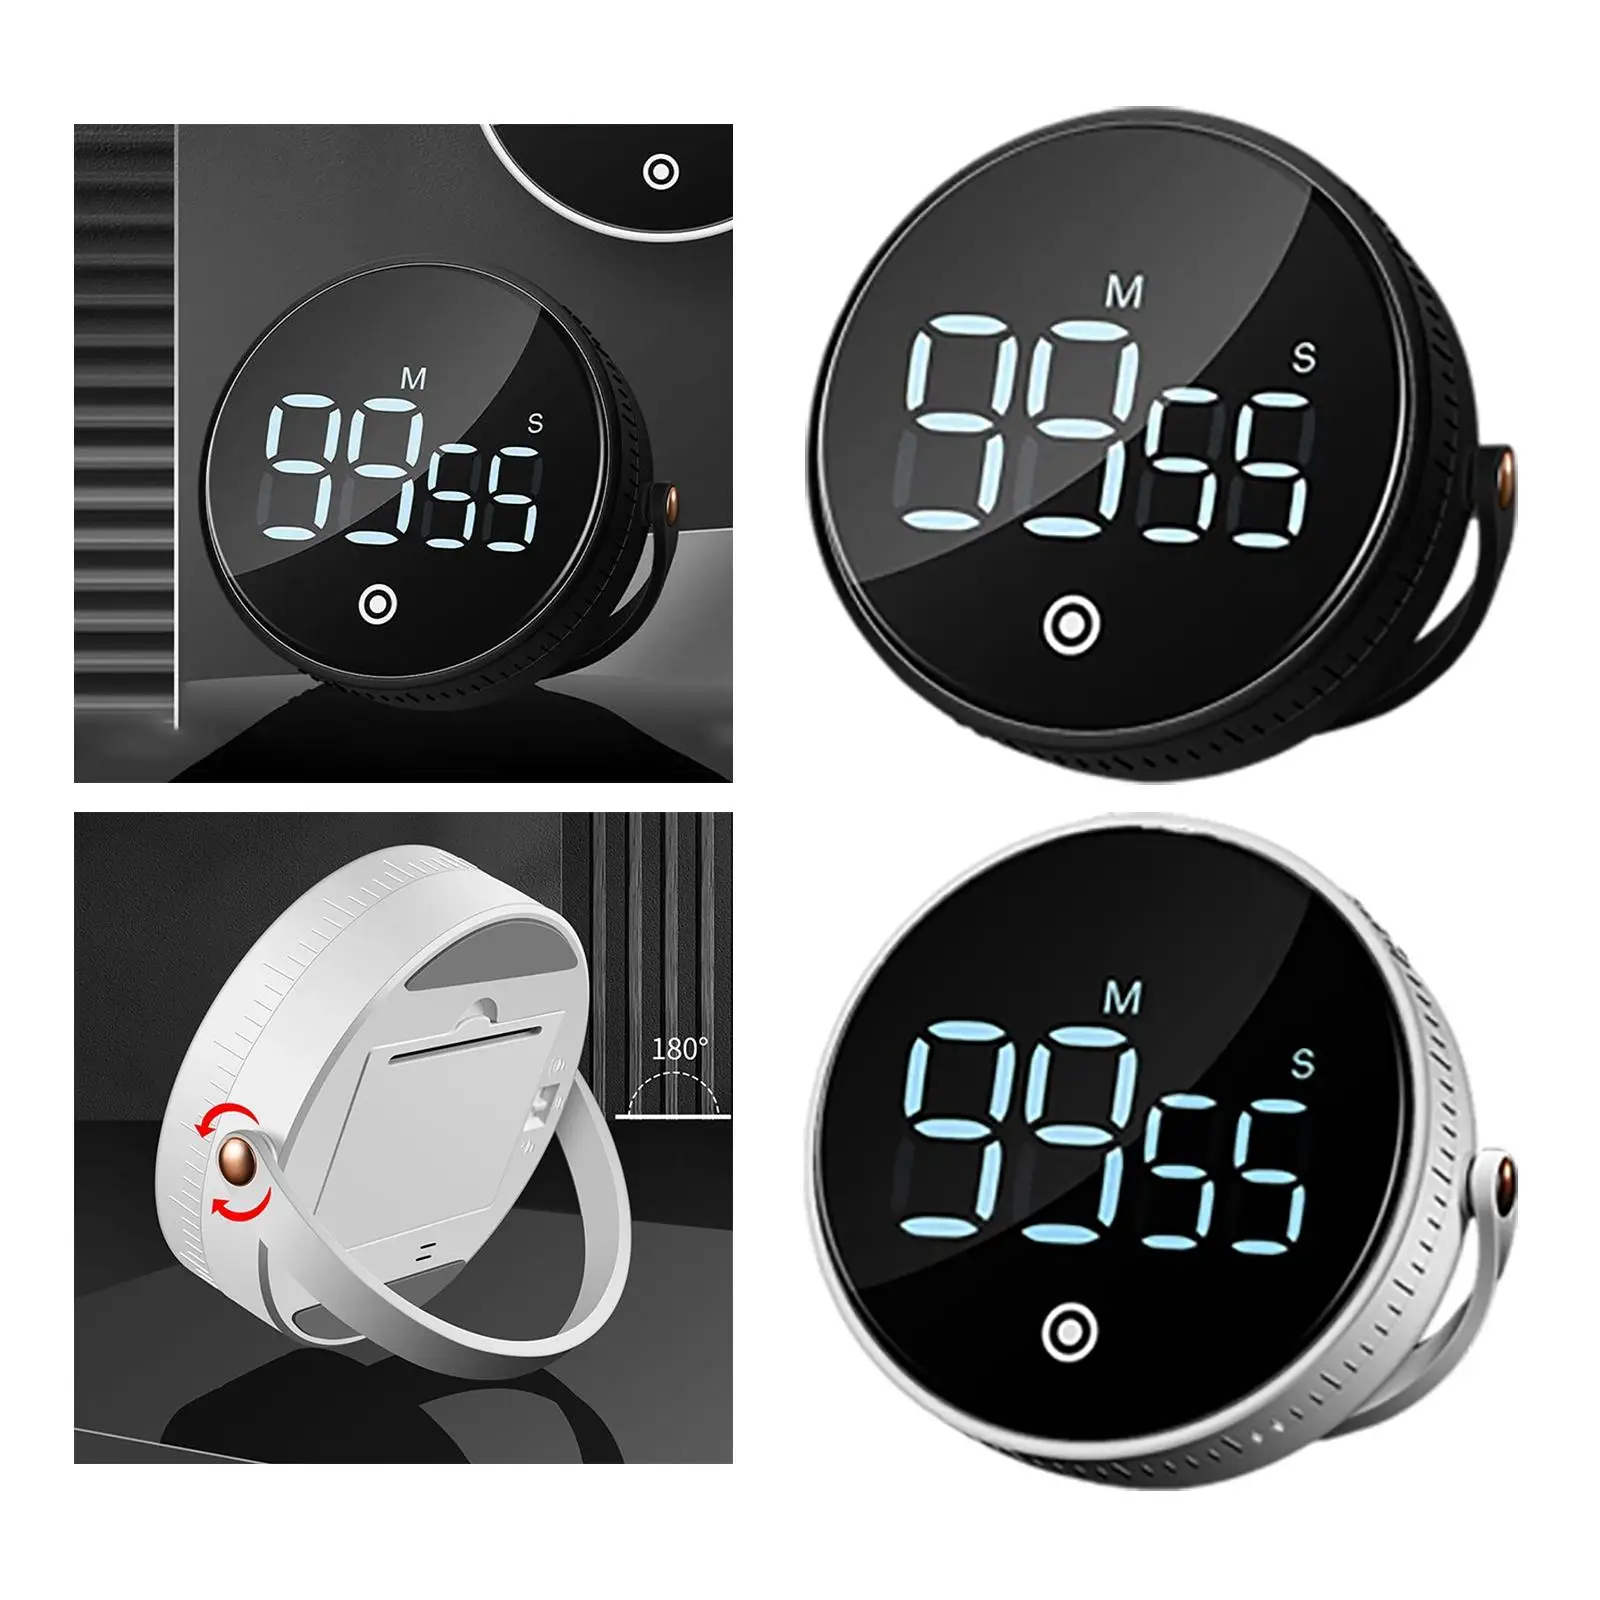 3inch Large LED Magnetic Countdown Timer Twist One Button Operation 99 Minutes Time Timer Digital Kitchen Timer for Fitness Work